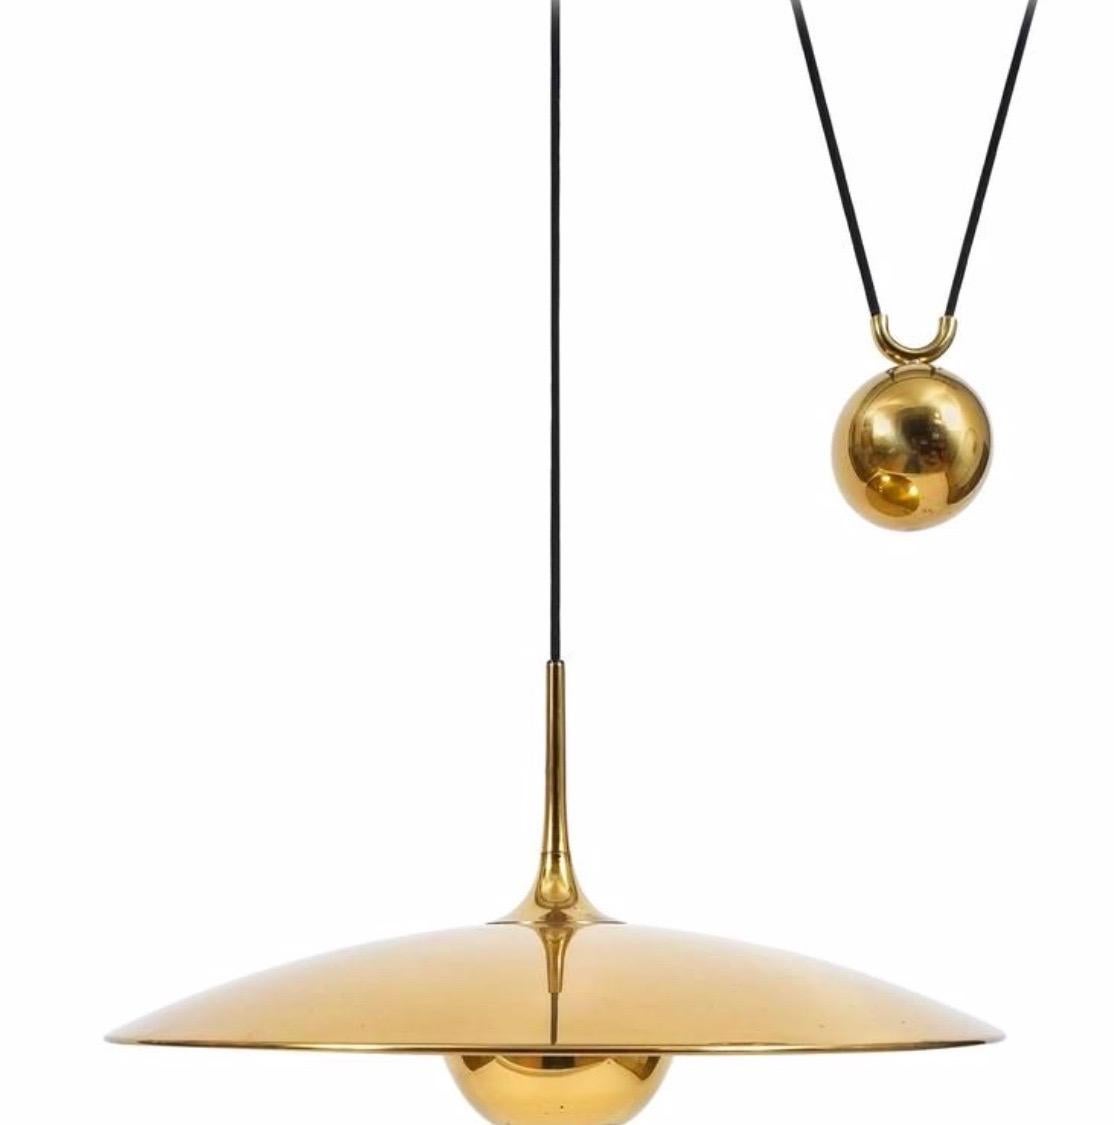 Great Florian Schulz double counter balance light in brass. Features two brass shades with 21.5 diameter, two brass ball counter-weights, brass canopy and hardware. One single j-box needed in the center. Black cloth cord. Both lights move up and